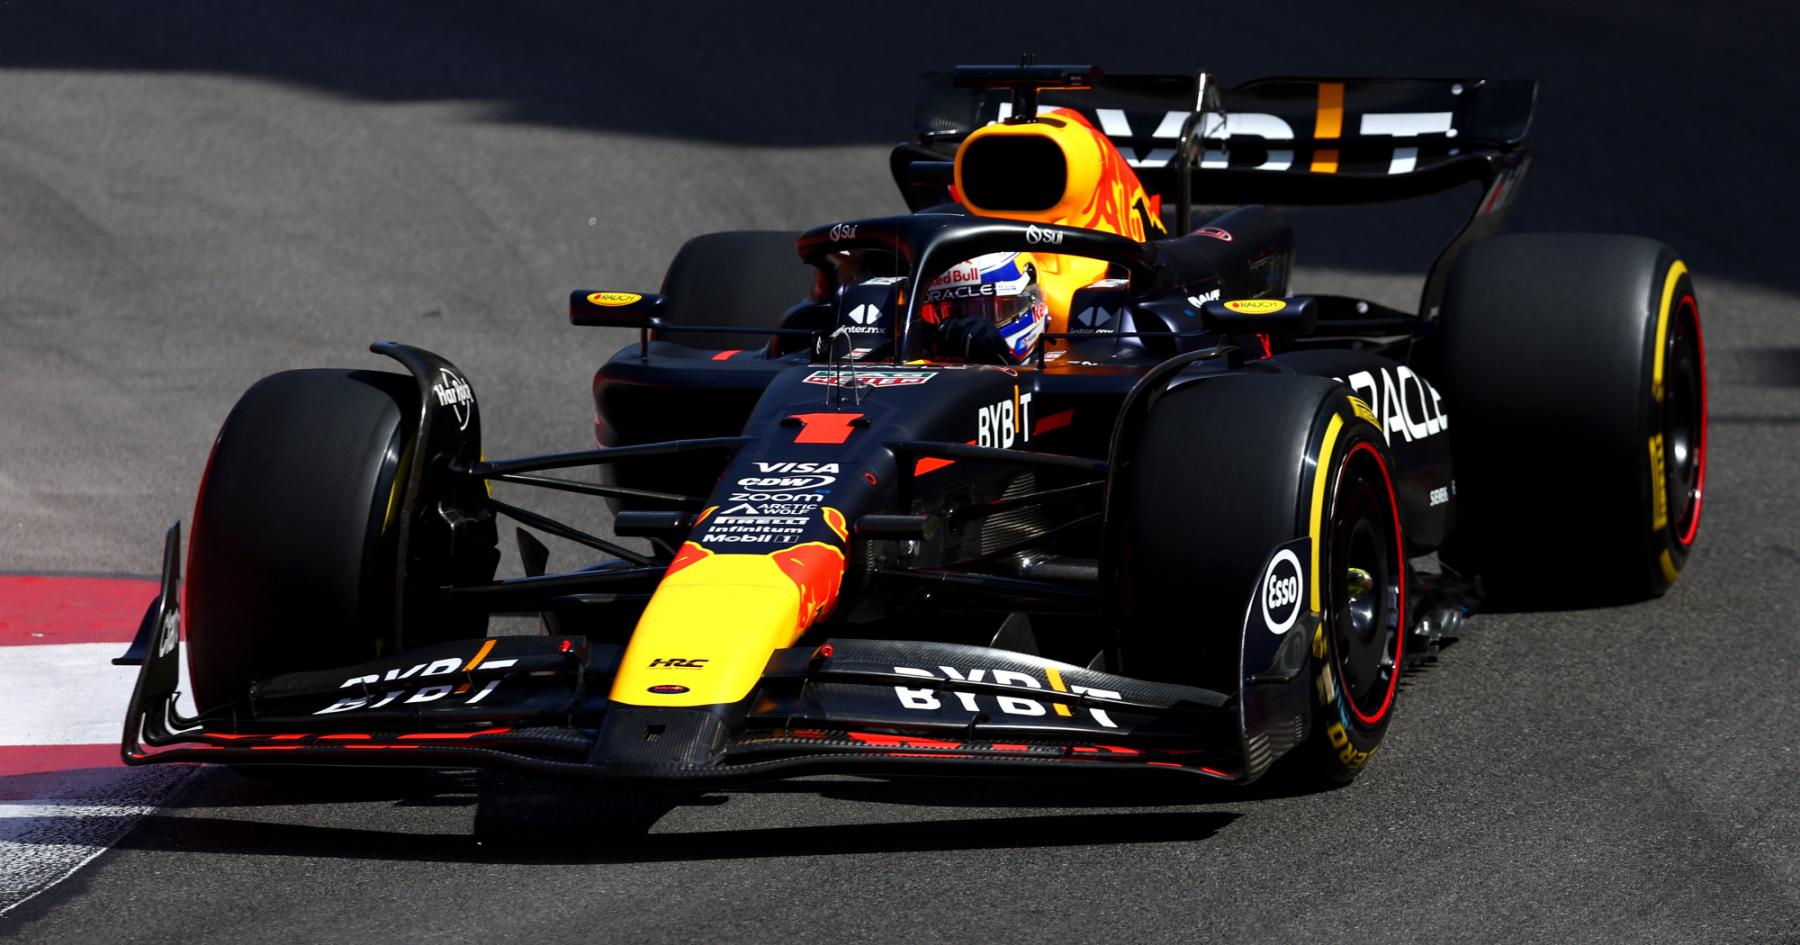 Why Verstappen and Red Bull face crucial weeks ahead